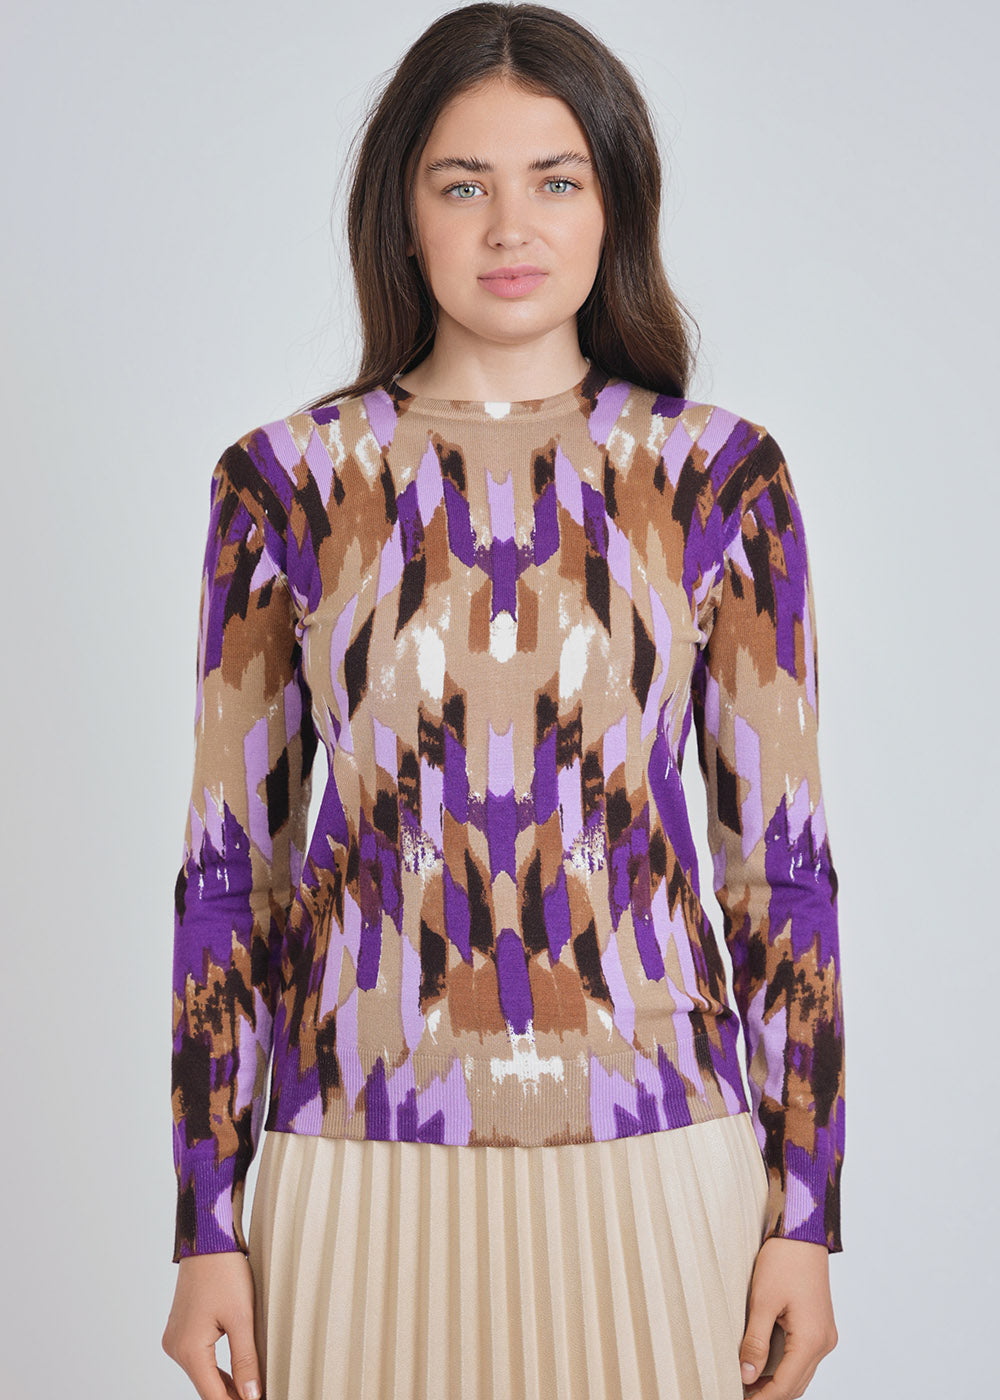 Abstract Purple Hue Knit Sweater